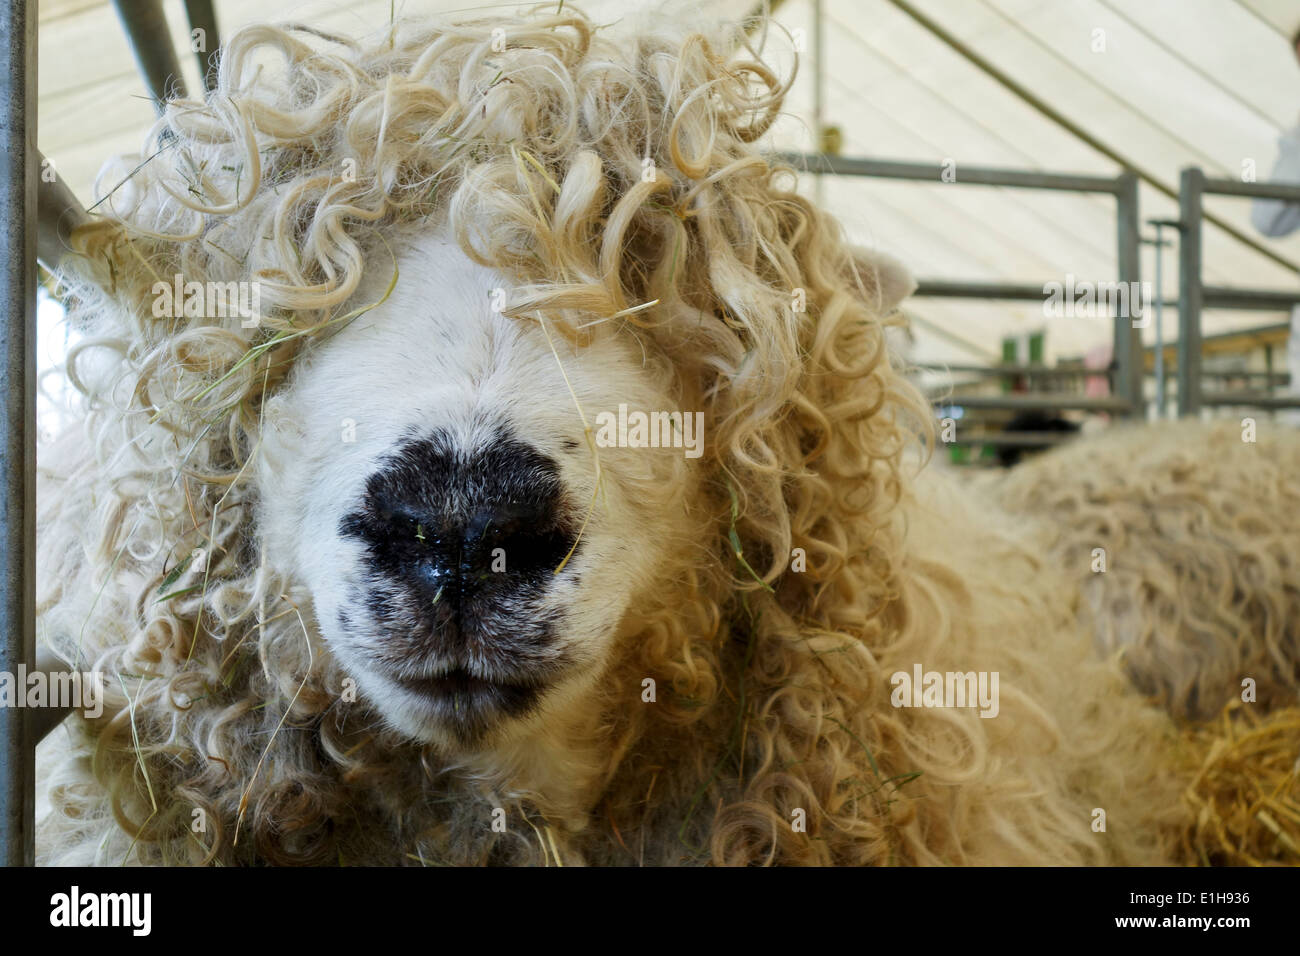 Portrait of a sheep looking at camera at The Bath & West Show Stock Photo